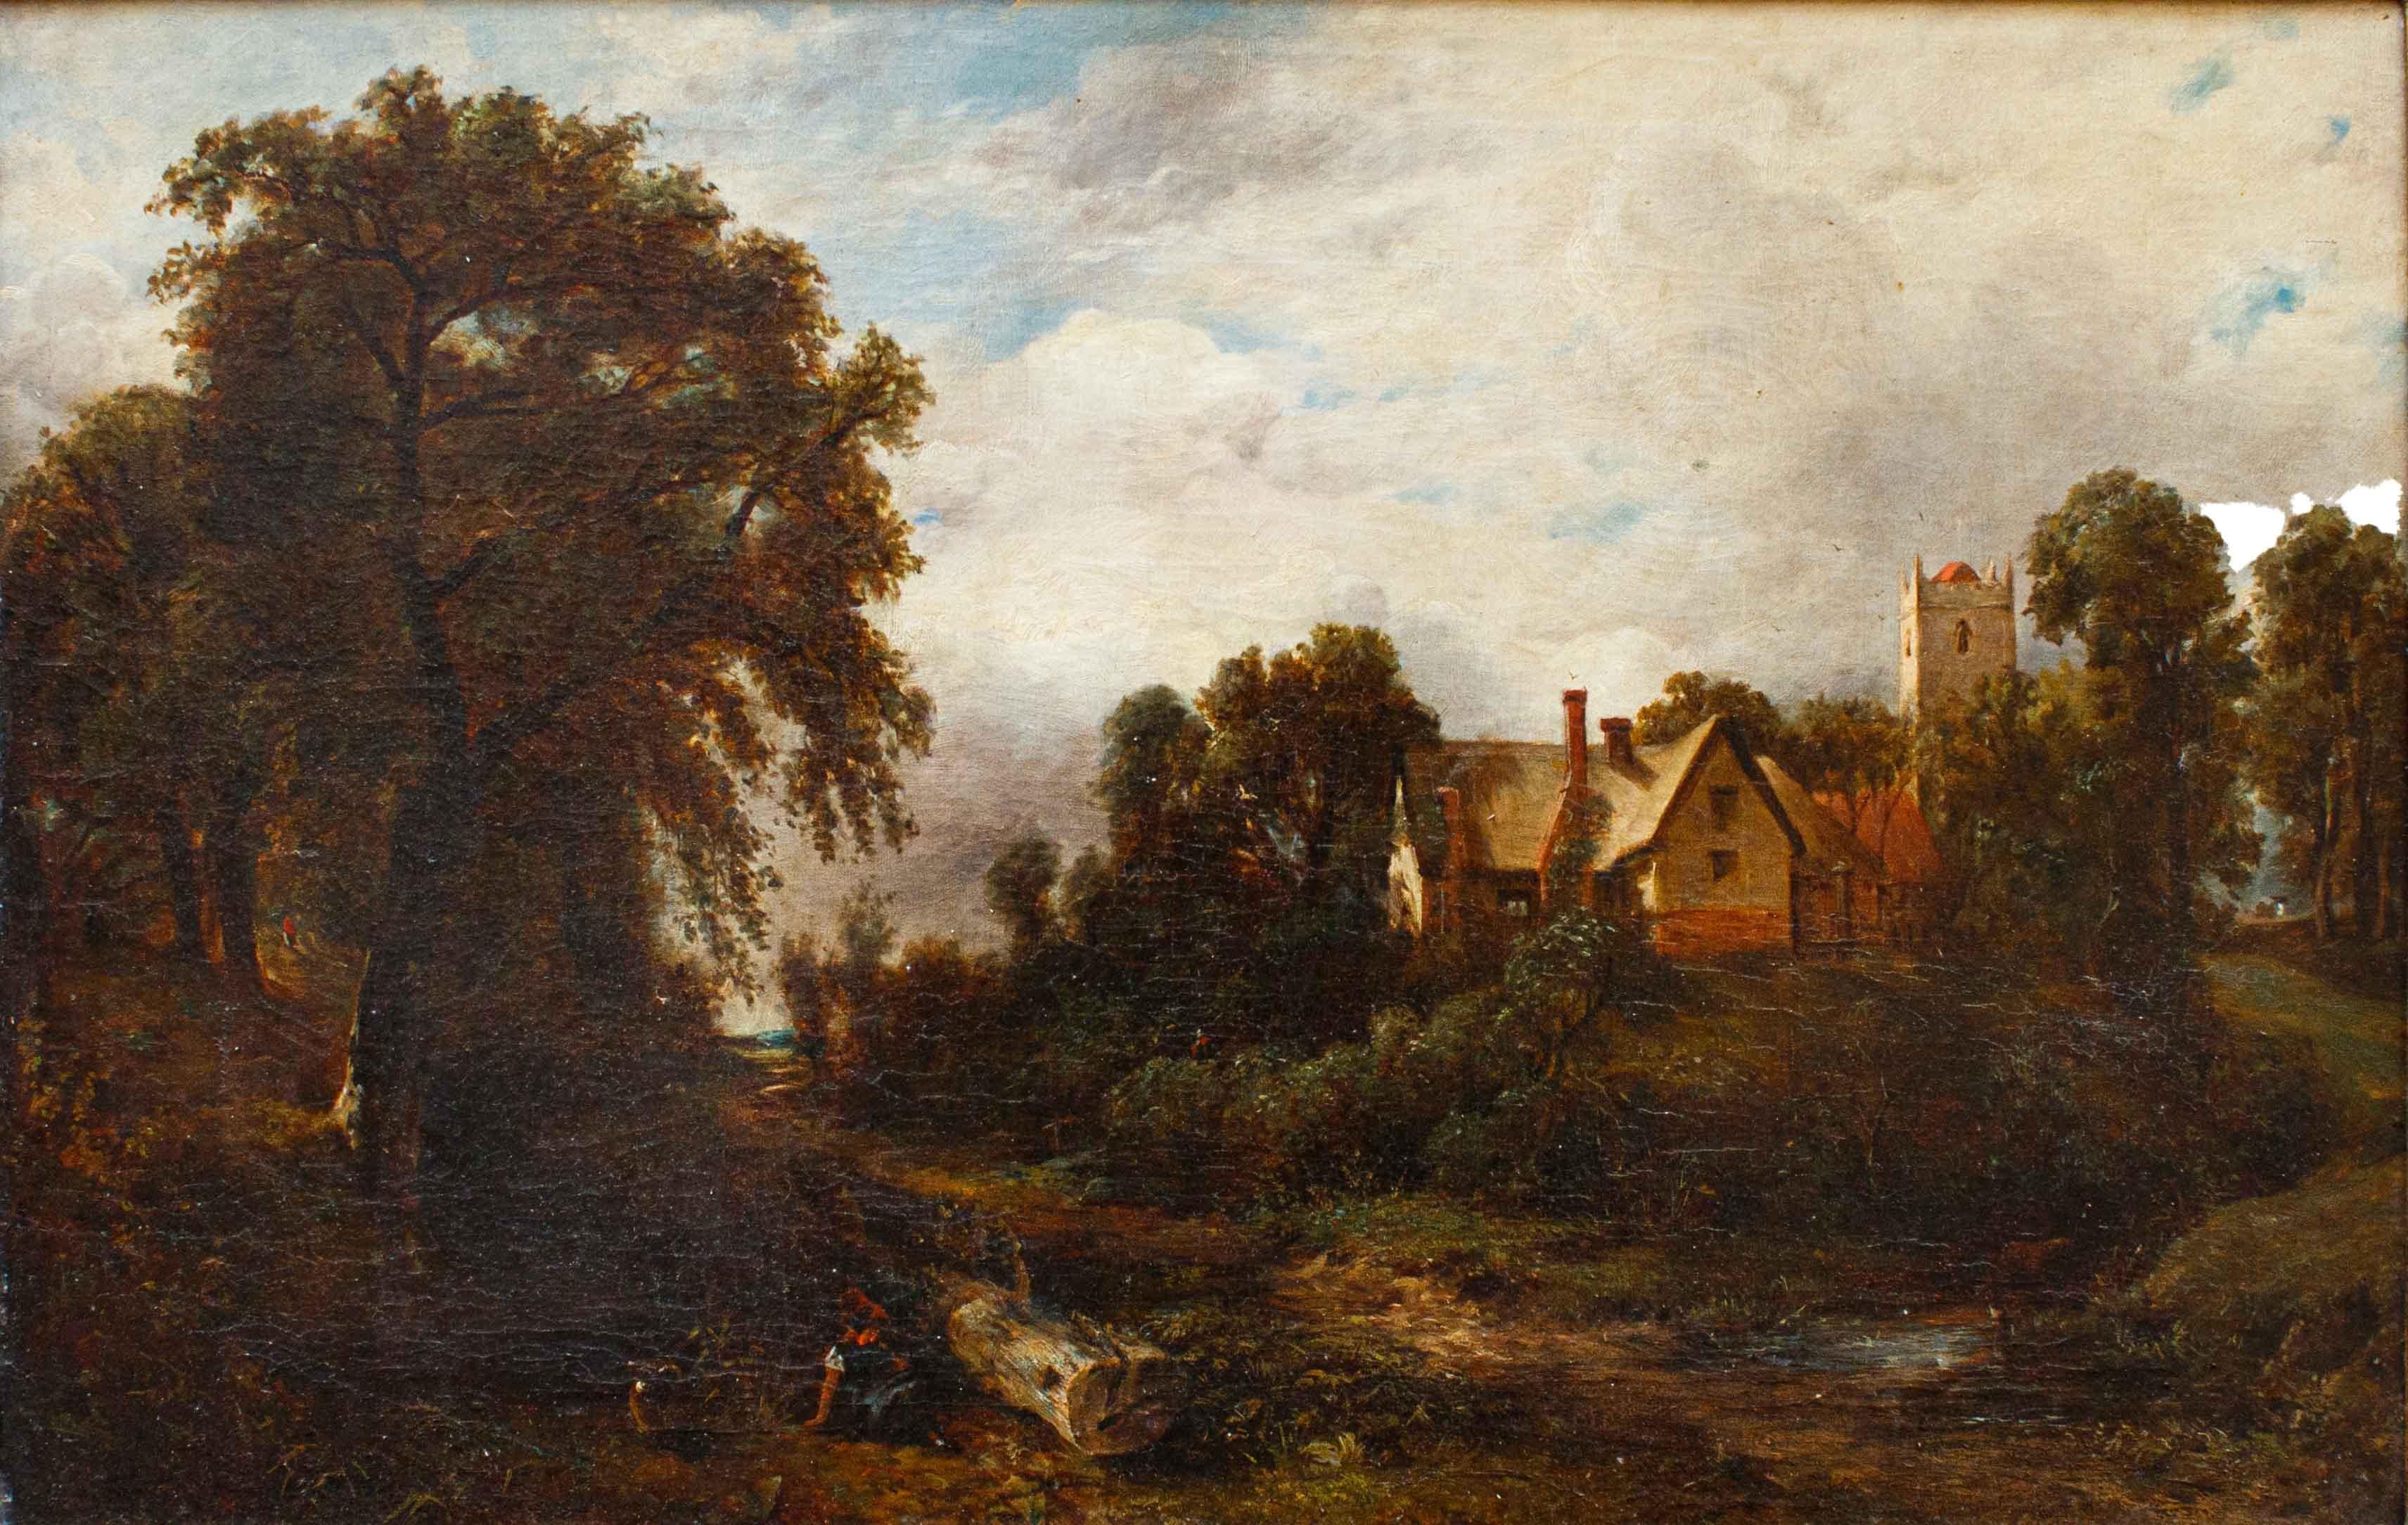 English school, 19th century.

Landscape

Oil on canvas, measures : cm 50 x 76

Frame cm 68 x 96

The painting in question, of the English school, refers explicitly to the poetics of John Constable (1776-1837), famous British painter